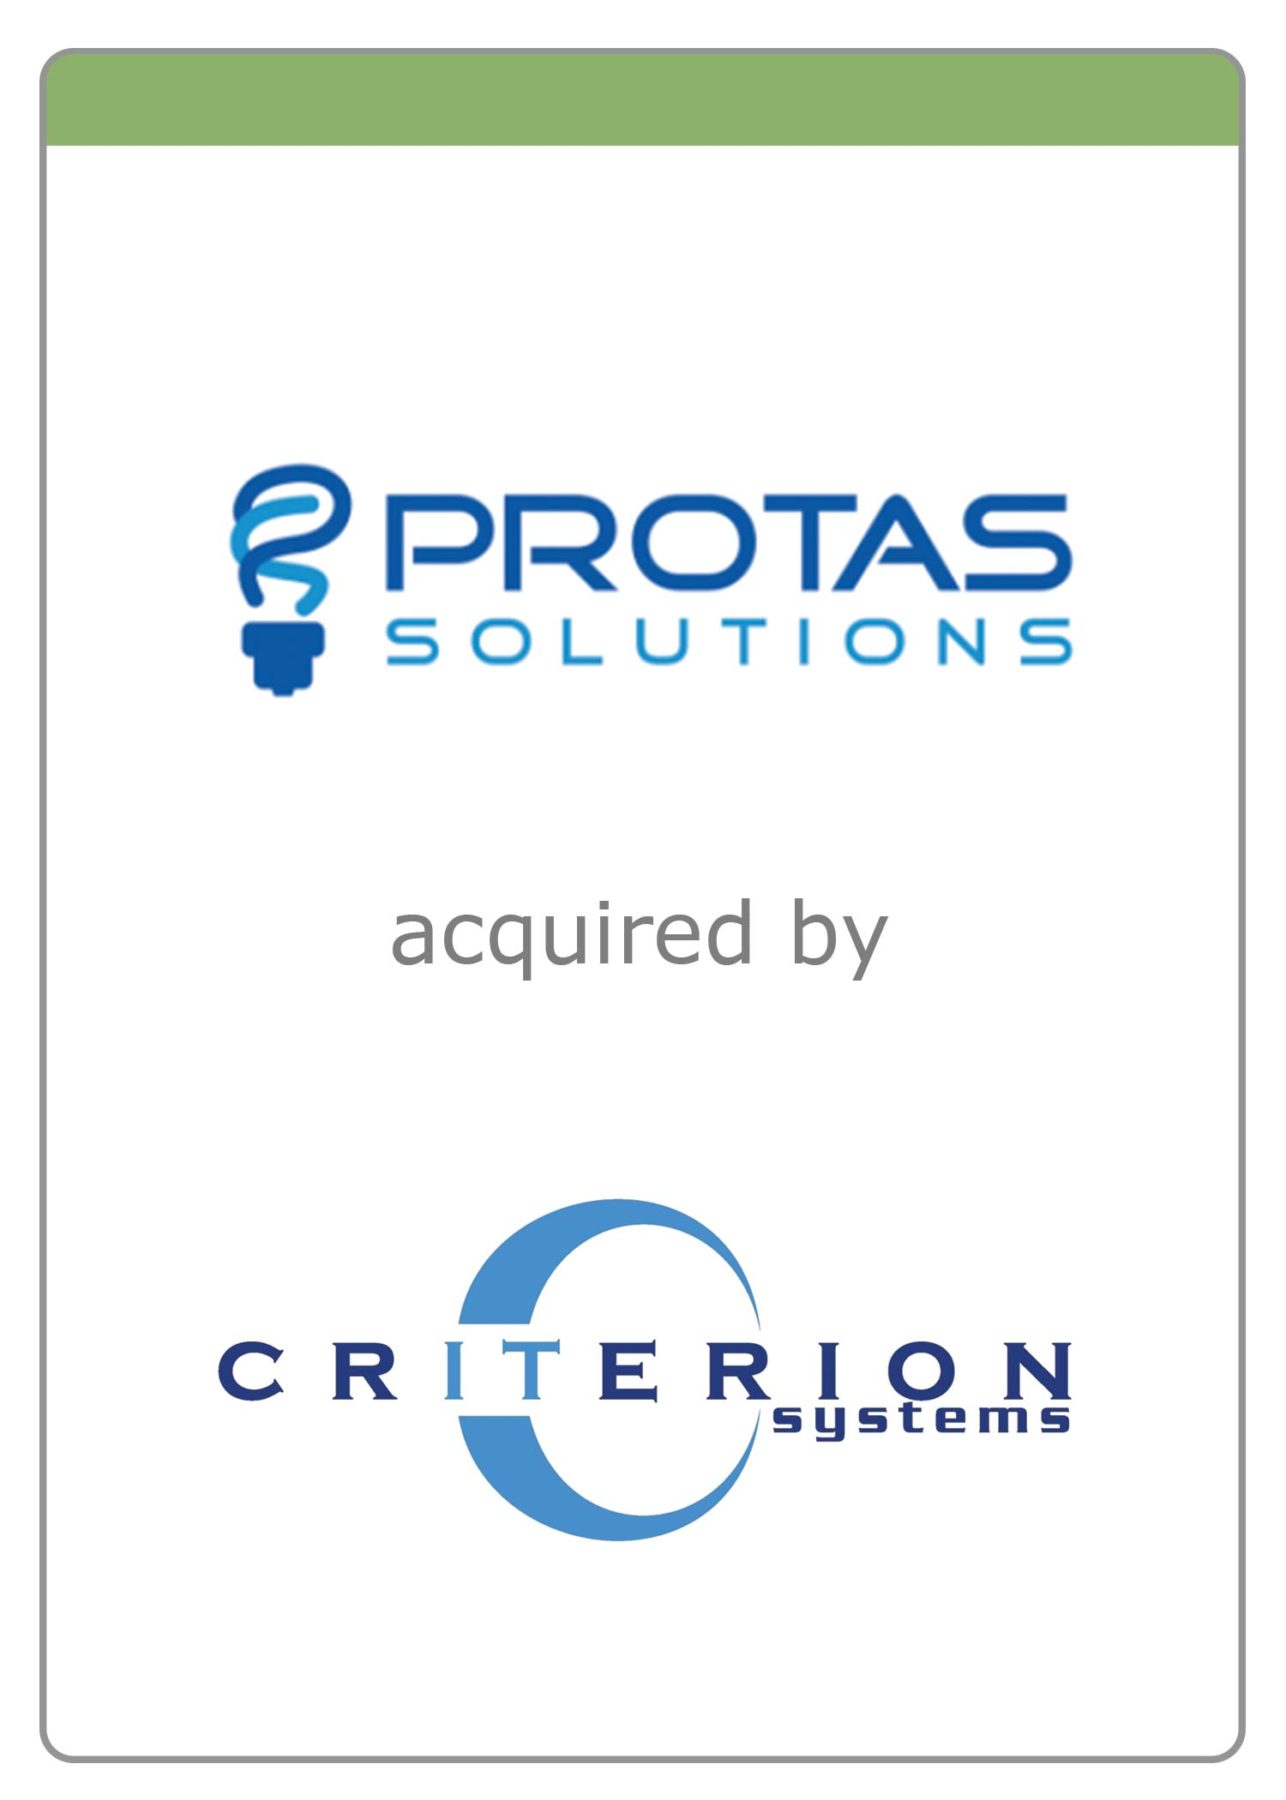 Protas Solutions acquired by Criterion Systems